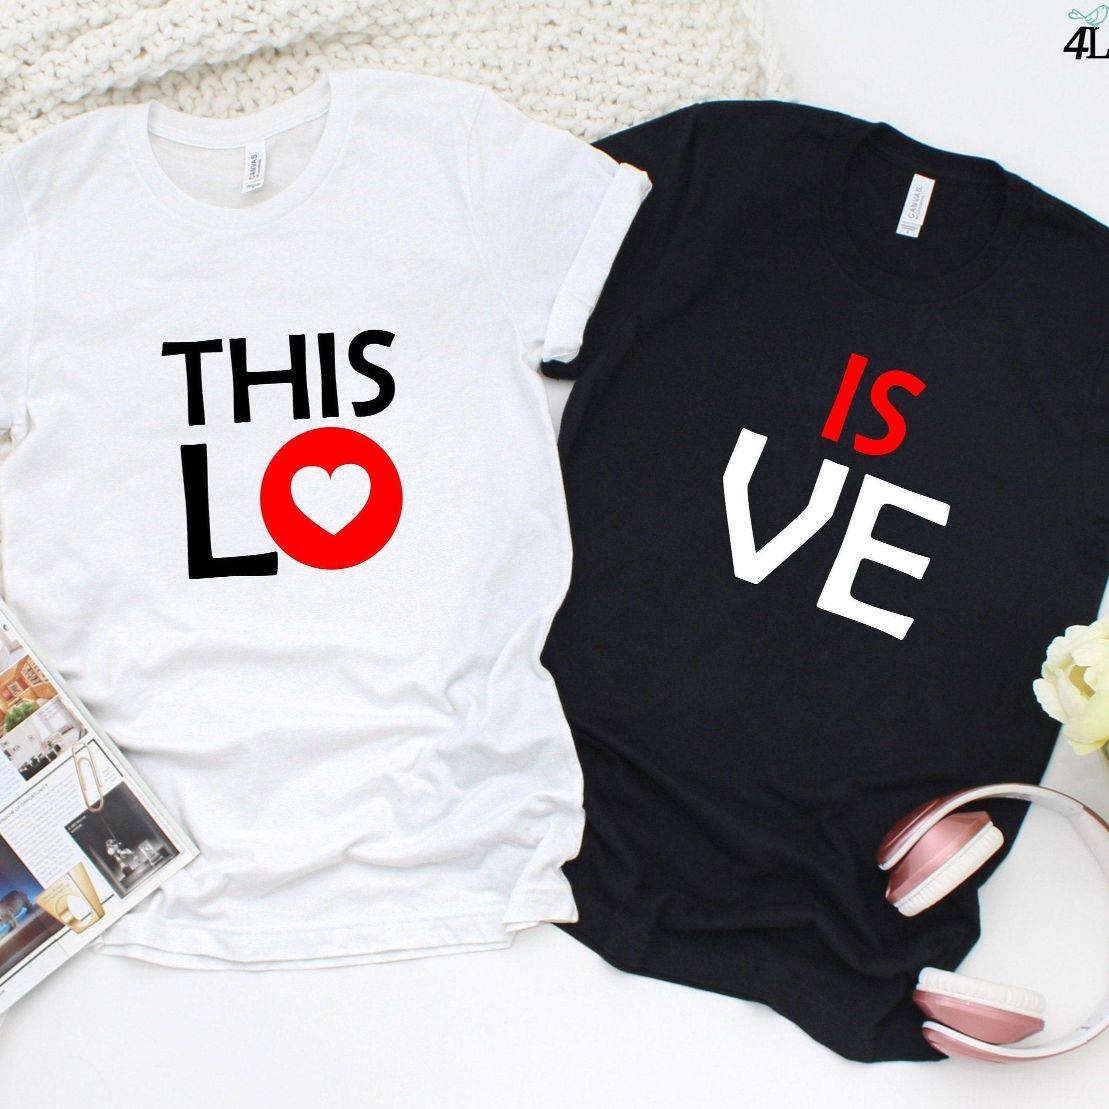 Loving Couples Matching Set - Valentine's Gift - Adorable This is Love Themed Outfits